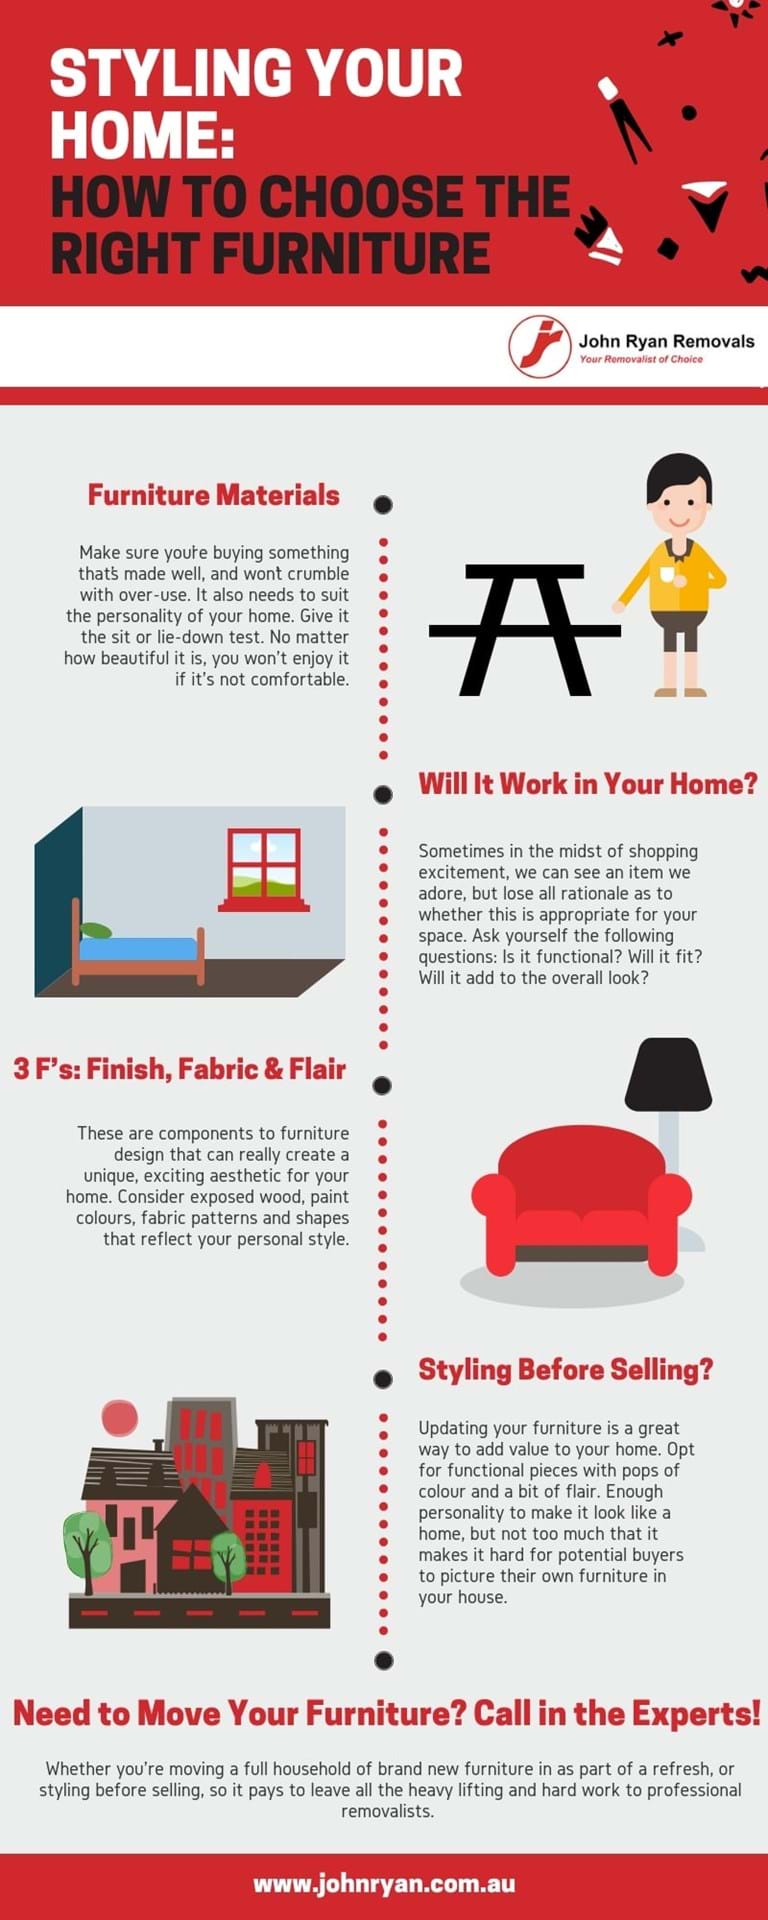 How to choose the right furniture